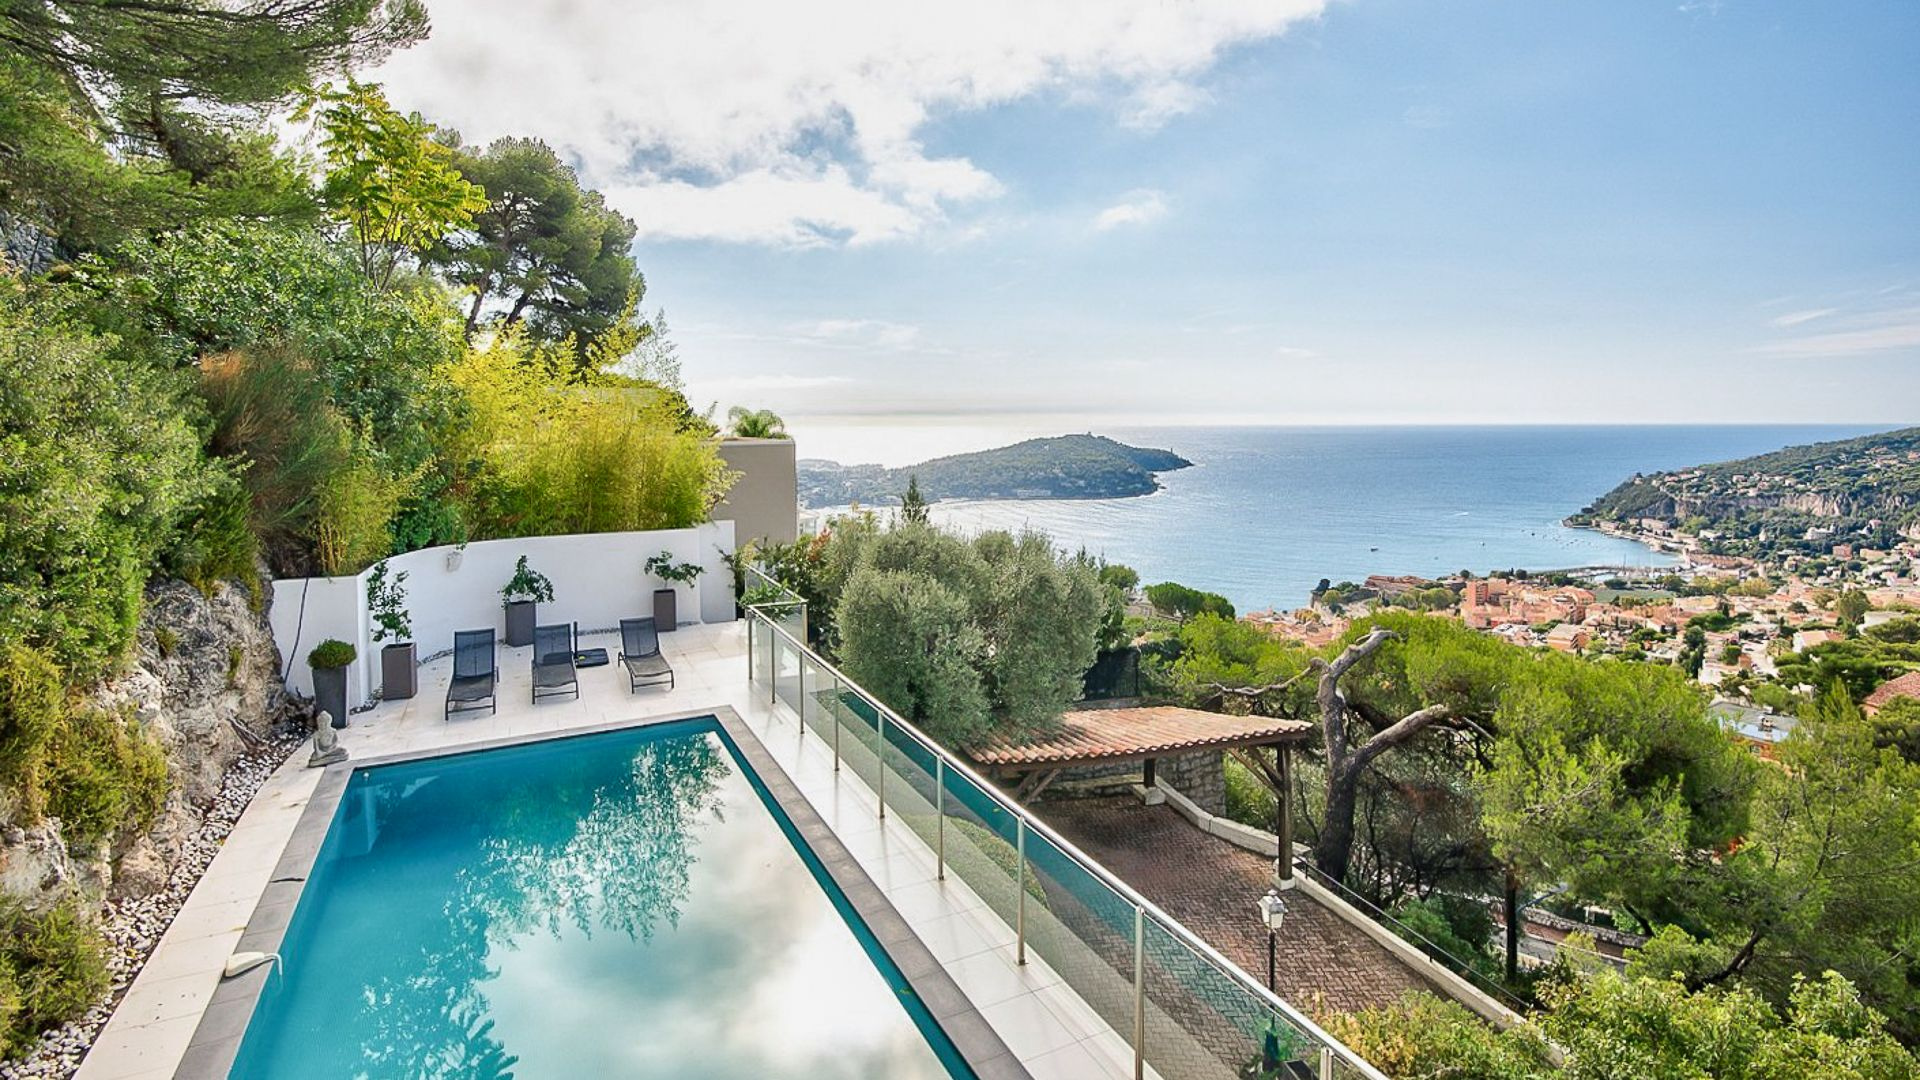 Contemporary house in Villefranche with sea and Cap Ferrat view